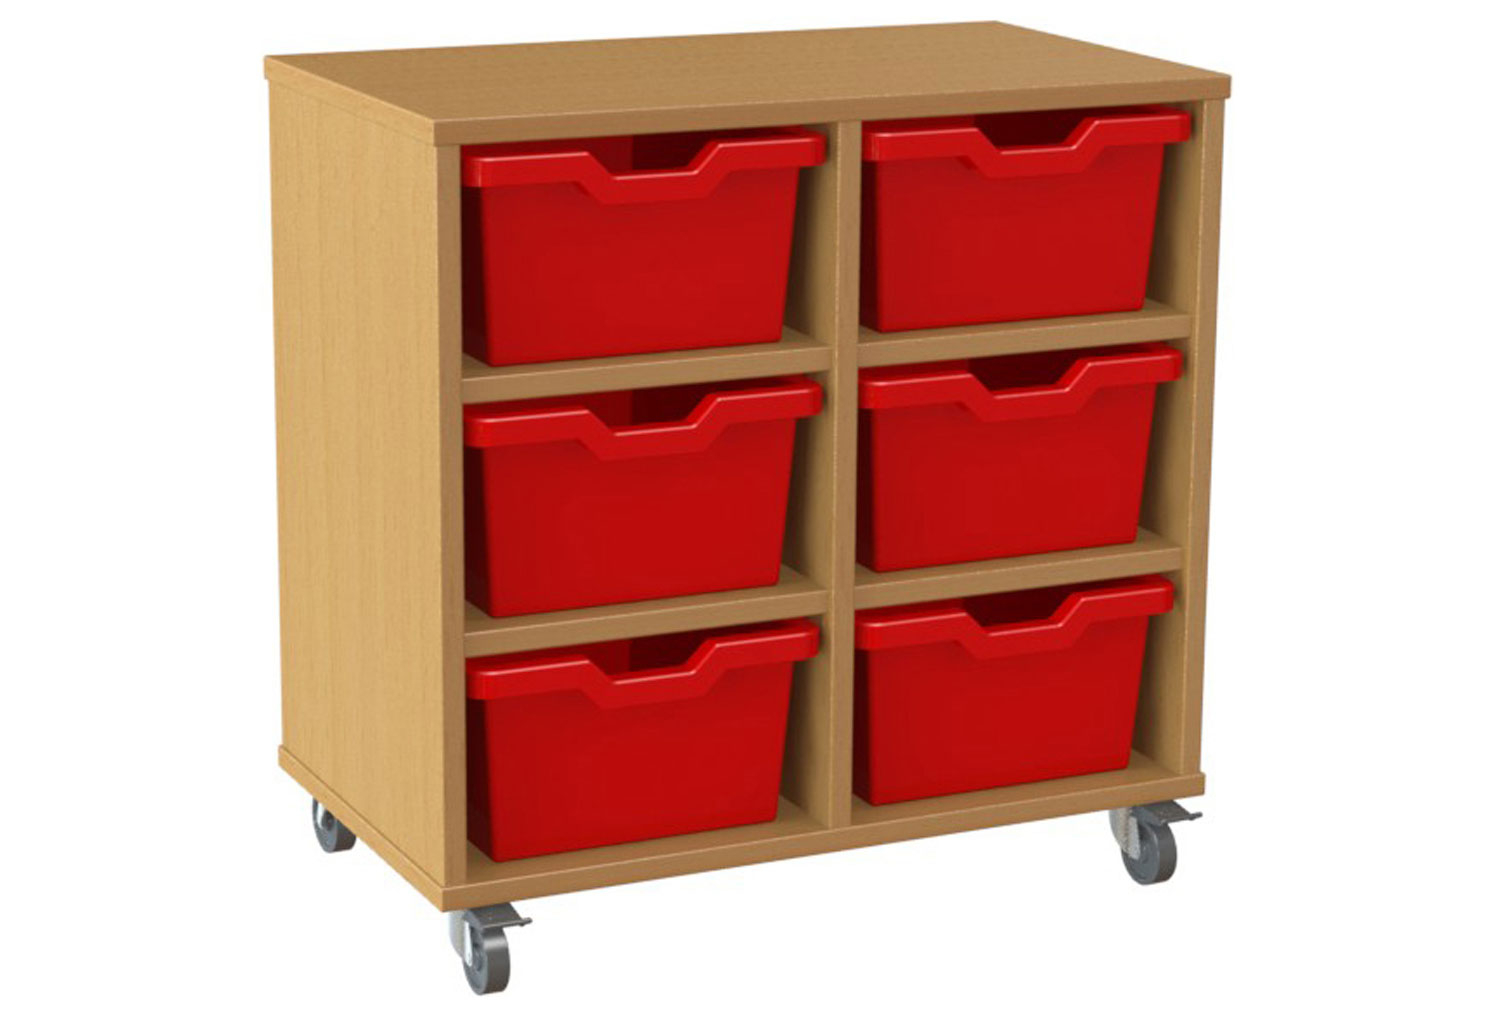 Salas Double Column Storage Unit With 6 Cubby Classroom Trays, Red, Translucent Classroom Trays